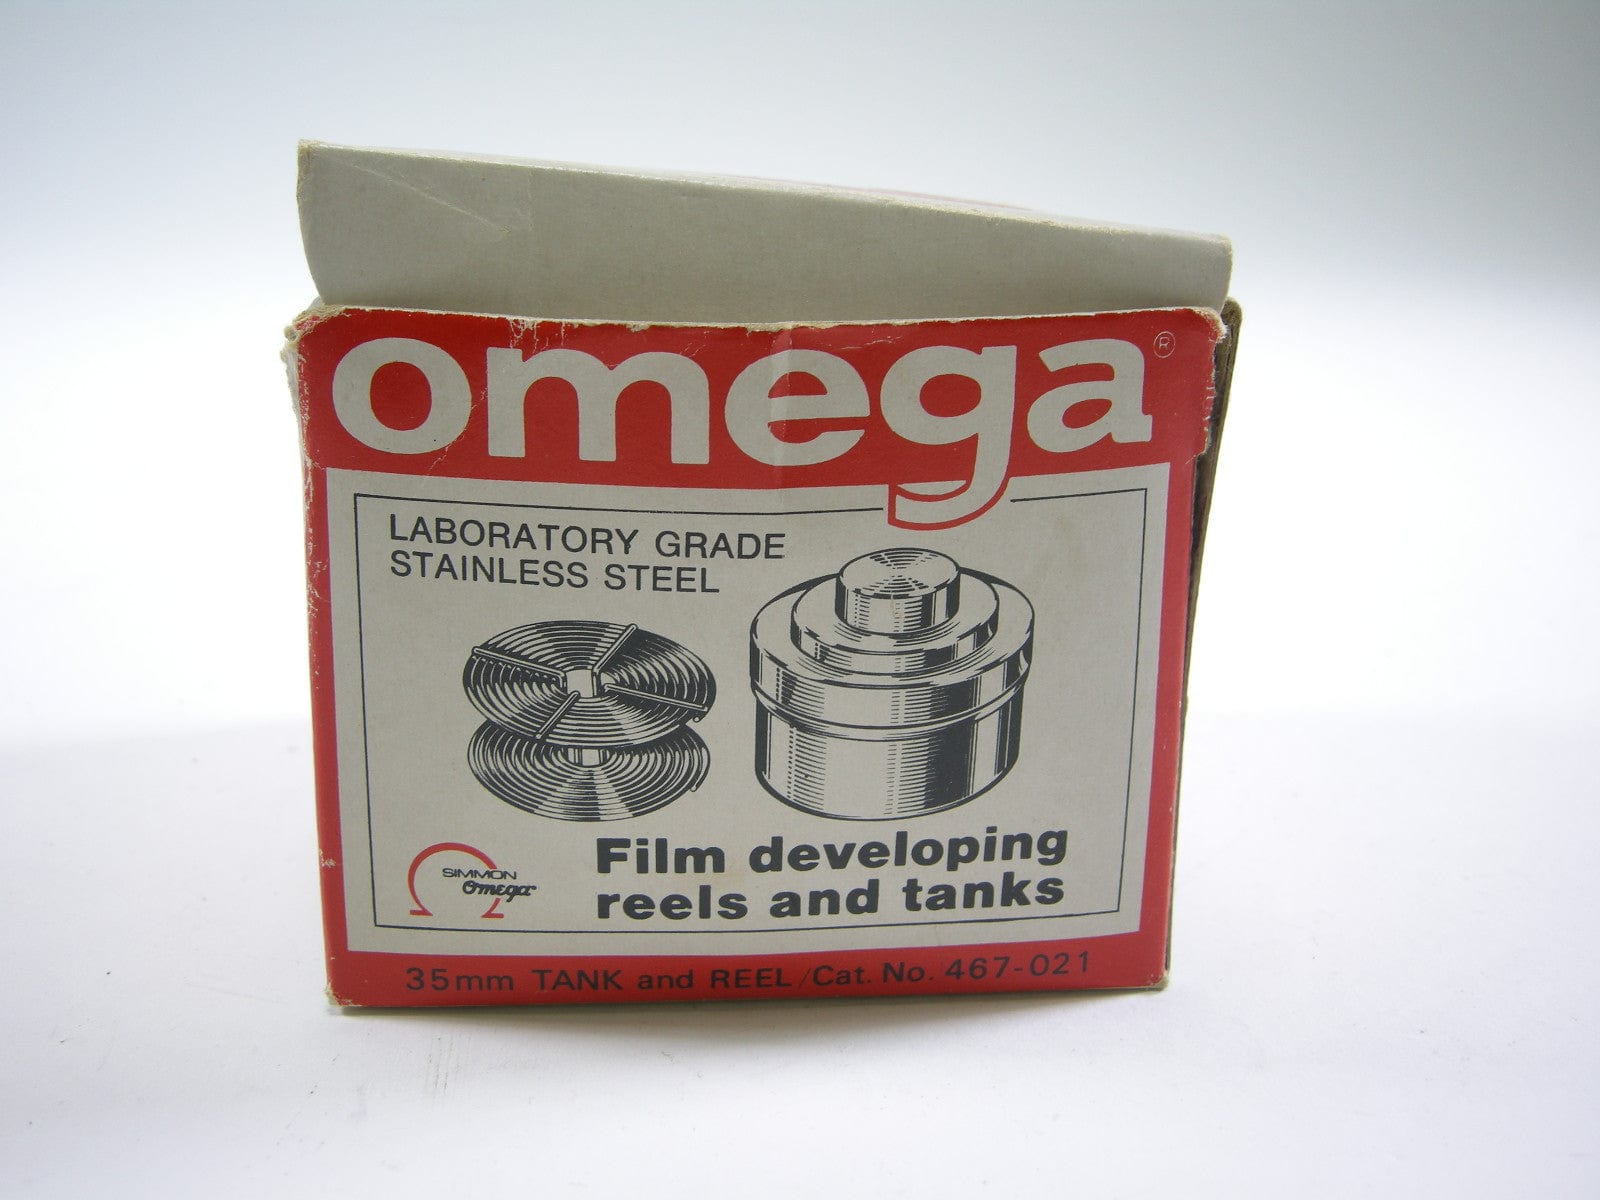 http://cameraexc.com/cdn/shop/files/omega-quick-fill-stainless-steel-film-reel-and-tank-darkroom-supplies-misc-darkroom-supplies-omega-020290232-42021958779131.jpg?v=1709334683